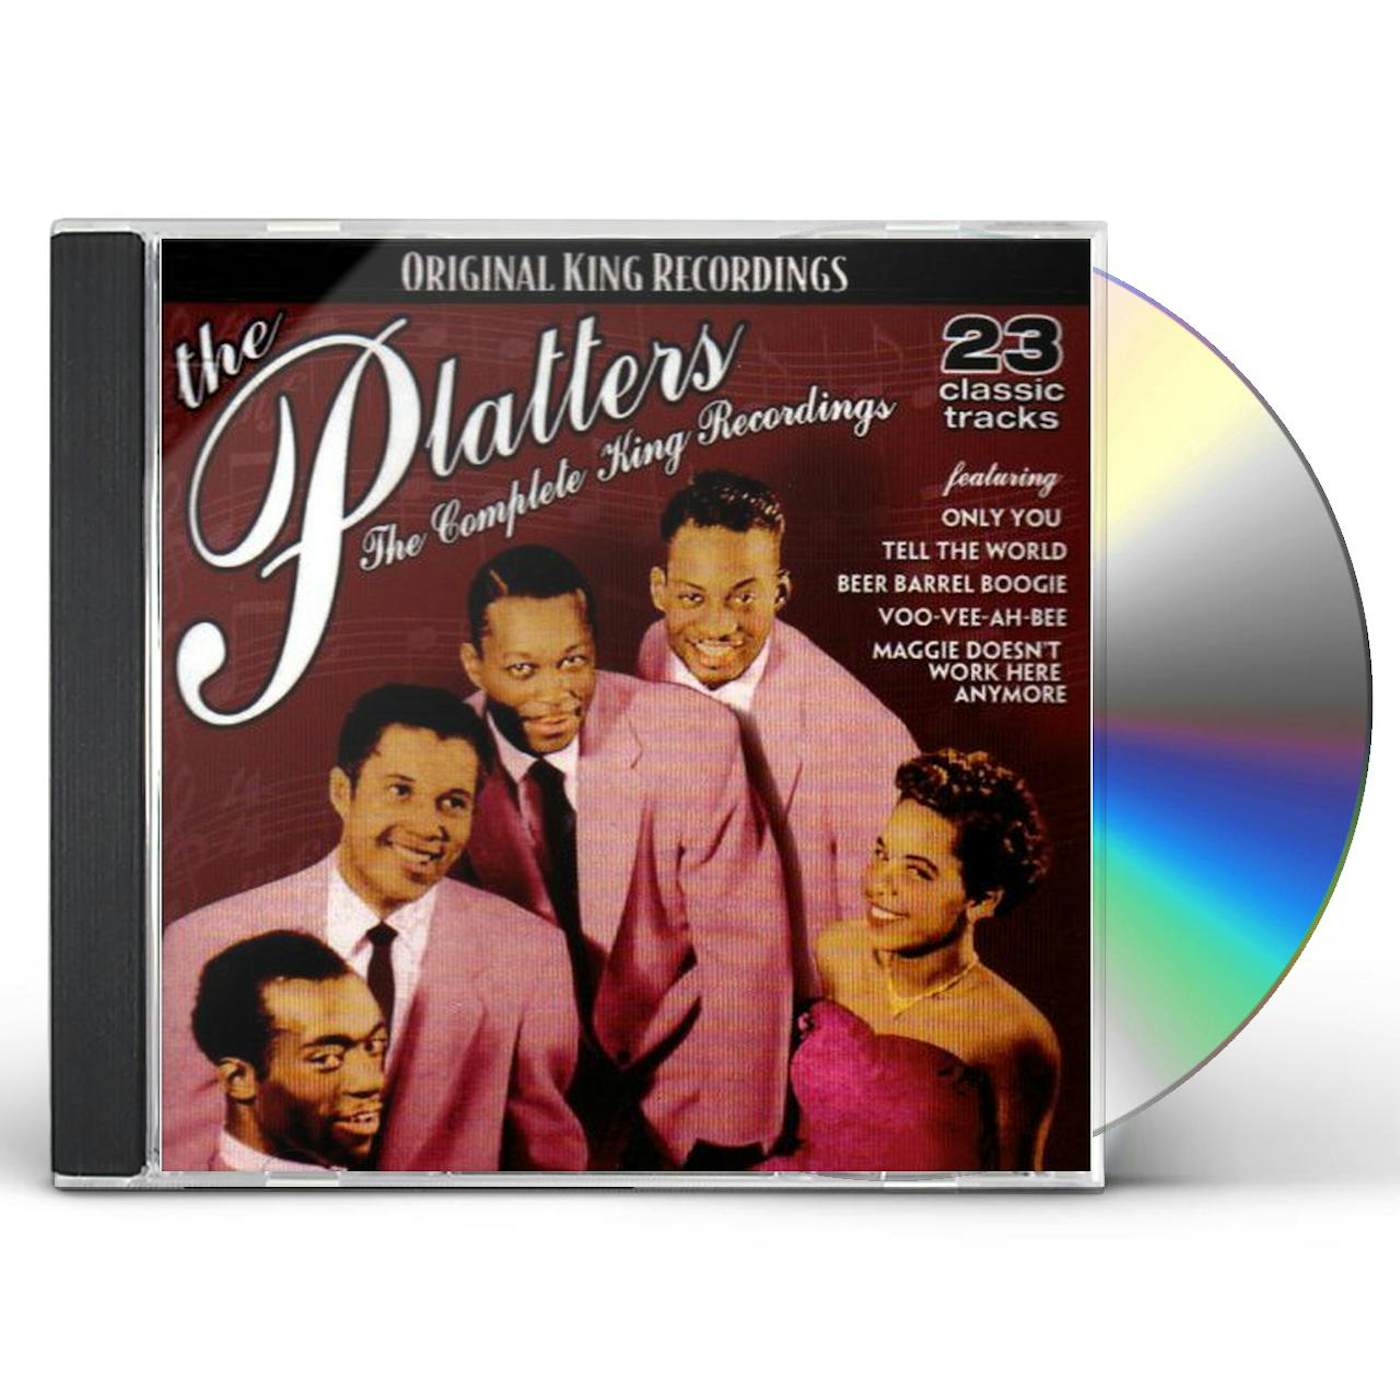 The Platters COMPLETE KING RECORDINGS CD